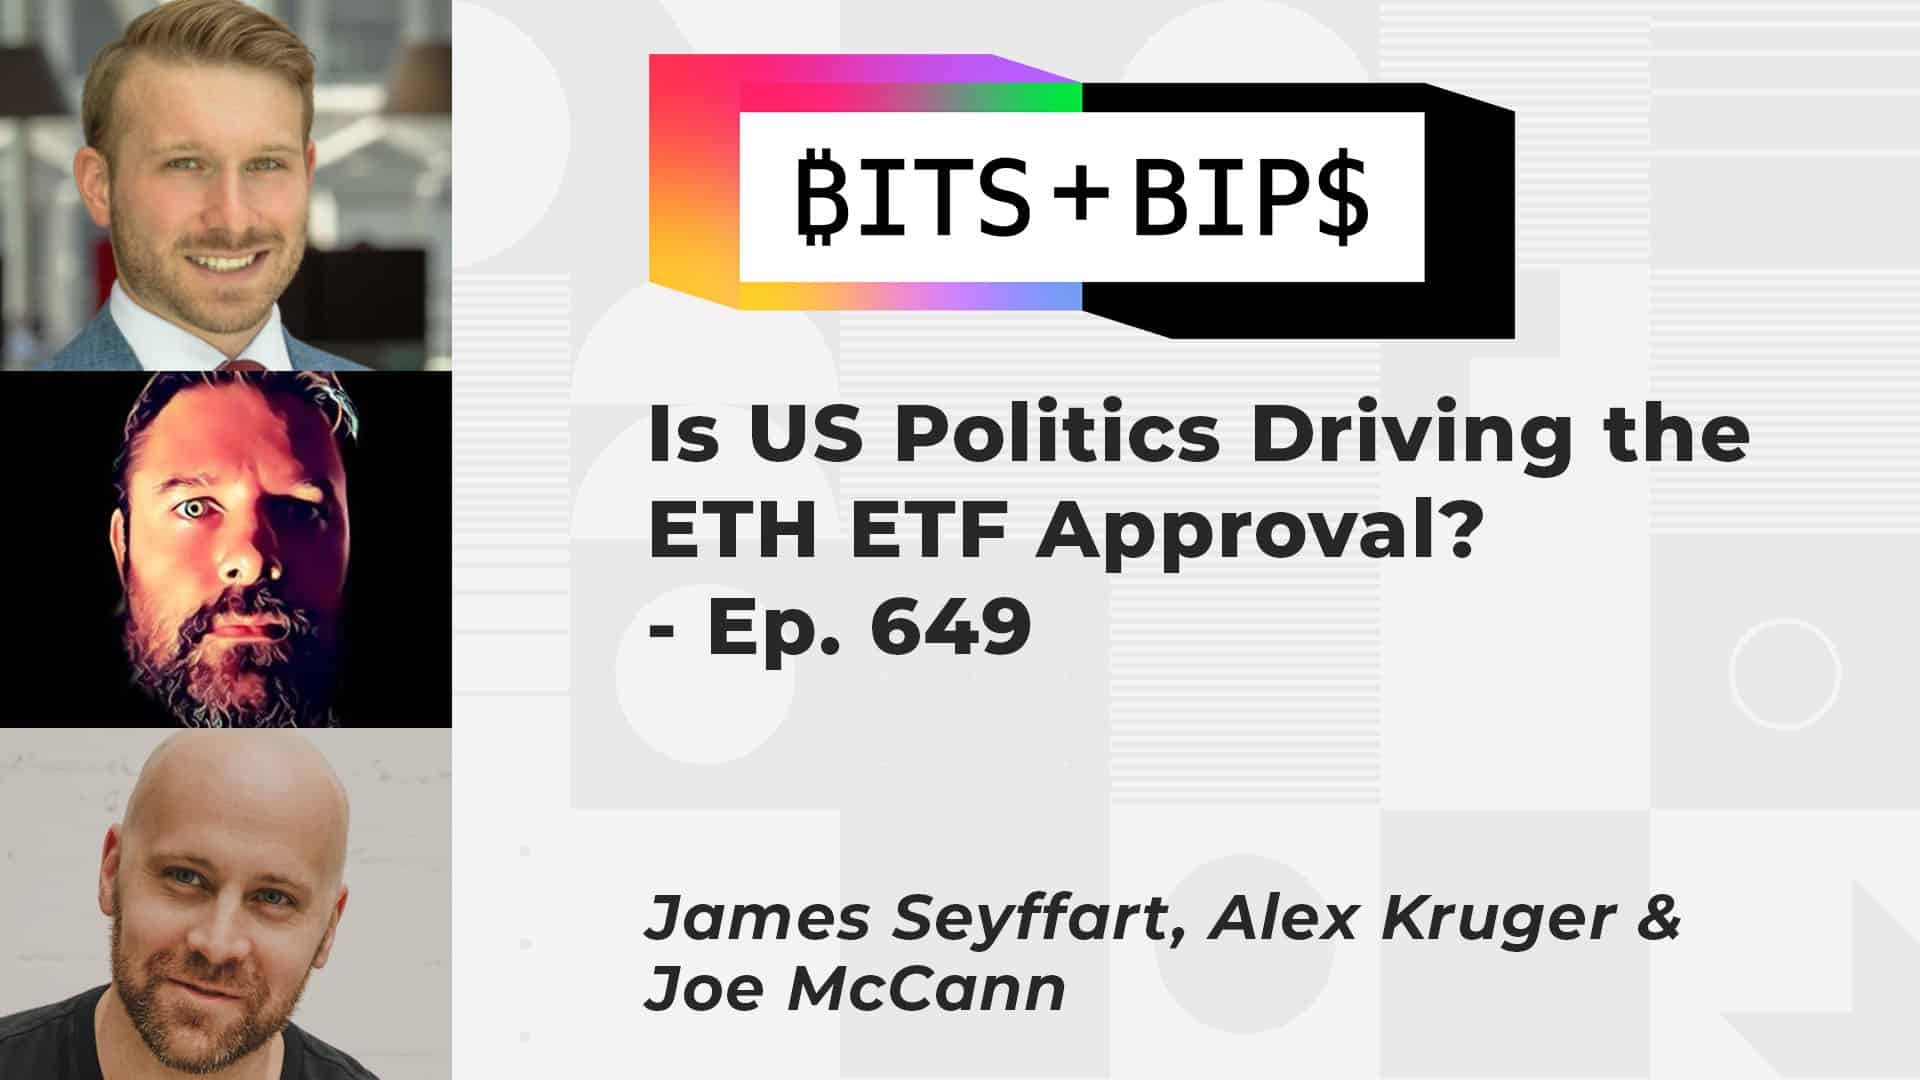 Bits + Bips: Is US Politics Driving the ETH ETF Approval?